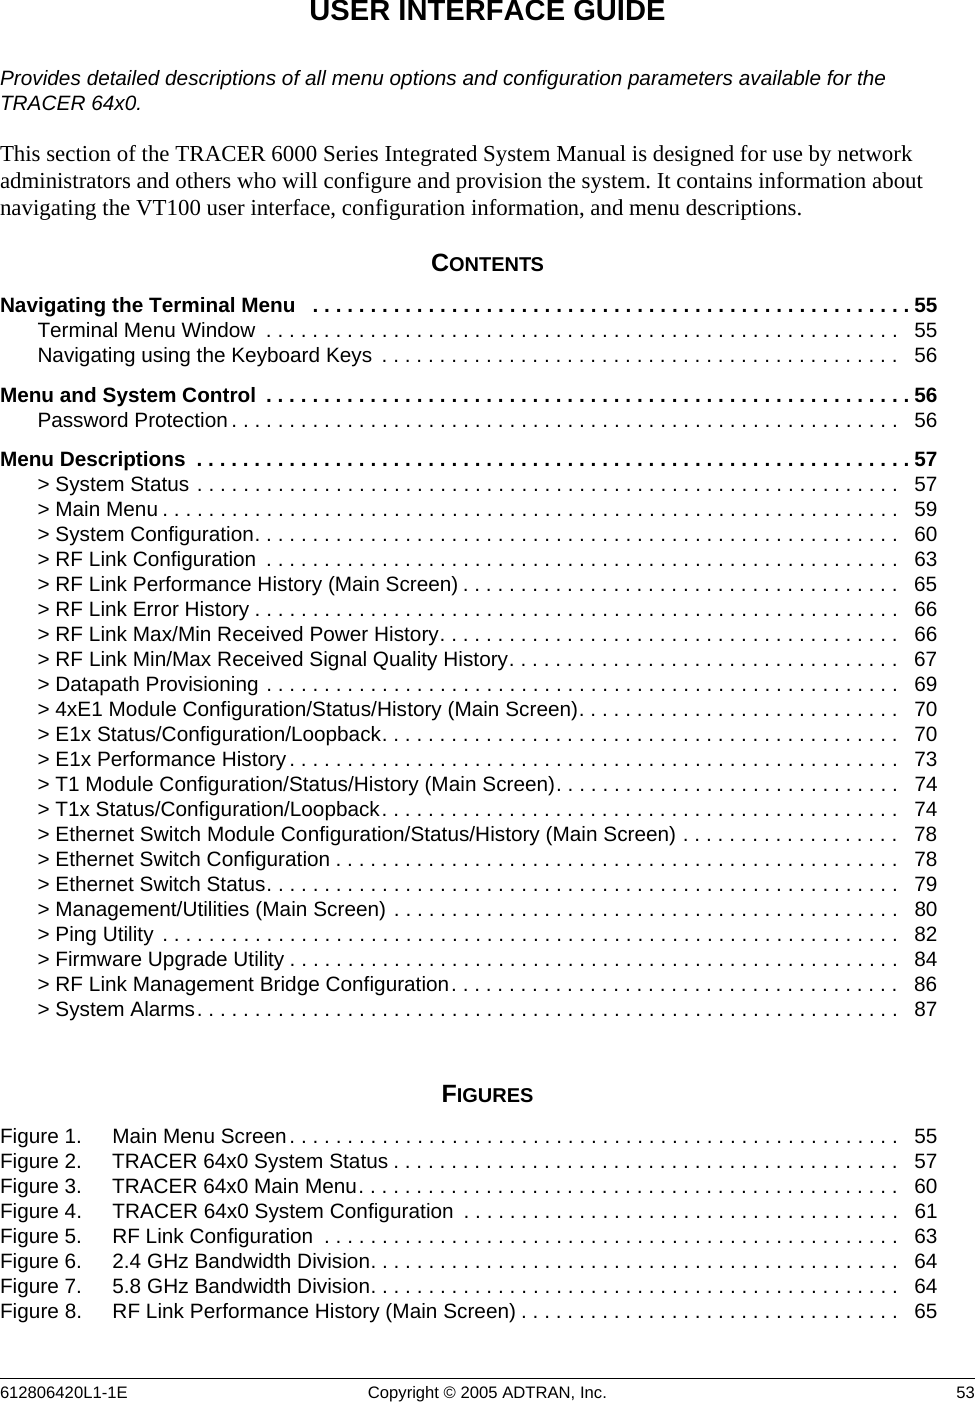 612806420L1-1E Copyright © 2005 ADTRAN, Inc.  53USER INTERFACE GUIDEProvides detailed descriptions of all menu options and configuration parameters available for the TRACER 64x0.This section of the TRACER 6000 Series Integrated System Manual is designed for use by network administrators and others who will configure and provision the system. It contains information about navigating the VT100 user interface, configuration information, and menu descriptions.CONTENTSNavigating the Terminal Menu   . . . . . . . . . . . . . . . . . . . . . . . . . . . . . . . . . . . . . . . . . . . . . . . . . . . . 55Terminal Menu Window  . . . . . . . . . . . . . . . . . . . . . . . . . . . . . . . . . . . . . . . . . . . . . . . . . . . . . . .   55Navigating using the Keyboard Keys  . . . . . . . . . . . . . . . . . . . . . . . . . . . . . . . . . . . . . . . . . . . . .   56Menu and System Control  . . . . . . . . . . . . . . . . . . . . . . . . . . . . . . . . . . . . . . . . . . . . . . . . . . . . . . . . 56Password Protection . . . . . . . . . . . . . . . . . . . . . . . . . . . . . . . . . . . . . . . . . . . . . . . . . . . . . . . . . .   56Menu Descriptions  . . . . . . . . . . . . . . . . . . . . . . . . . . . . . . . . . . . . . . . . . . . . . . . . . . . . . . . . . . . . . . 57&gt; System Status . . . . . . . . . . . . . . . . . . . . . . . . . . . . . . . . . . . . . . . . . . . . . . . . . . . . . . . . . . . . .   57&gt; Main Menu . . . . . . . . . . . . . . . . . . . . . . . . . . . . . . . . . . . . . . . . . . . . . . . . . . . . . . . . . . . . . . . .   59&gt; System Configuration. . . . . . . . . . . . . . . . . . . . . . . . . . . . . . . . . . . . . . . . . . . . . . . . . . . . . . . .   60&gt; RF Link Configuration  . . . . . . . . . . . . . . . . . . . . . . . . . . . . . . . . . . . . . . . . . . . . . . . . . . . . . . .   63&gt; RF Link Performance History (Main Screen) . . . . . . . . . . . . . . . . . . . . . . . . . . . . . . . . . . . . . .   65&gt; RF Link Error History . . . . . . . . . . . . . . . . . . . . . . . . . . . . . . . . . . . . . . . . . . . . . . . . . . . . . . . .   66&gt; RF Link Max/Min Received Power History. . . . . . . . . . . . . . . . . . . . . . . . . . . . . . . . . . . . . . . .   66&gt; RF Link Min/Max Received Signal Quality History. . . . . . . . . . . . . . . . . . . . . . . . . . . . . . . . . .   67&gt; Datapath Provisioning . . . . . . . . . . . . . . . . . . . . . . . . . . . . . . . . . . . . . . . . . . . . . . . . . . . . . . .   69&gt; 4xE1 Module Configuration/Status/History (Main Screen). . . . . . . . . . . . . . . . . . . . . . . . . . . .   70&gt; E1x Status/Configuration/Loopback. . . . . . . . . . . . . . . . . . . . . . . . . . . . . . . . . . . . . . . . . . . . .   70&gt; E1x Performance History . . . . . . . . . . . . . . . . . . . . . . . . . . . . . . . . . . . . . . . . . . . . . . . . . . . . .   73&gt; T1 Module Configuration/Status/History (Main Screen). . . . . . . . . . . . . . . . . . . . . . . . . . . . . .   74&gt; T1x Status/Configuration/Loopback. . . . . . . . . . . . . . . . . . . . . . . . . . . . . . . . . . . . . . . . . . . . .   74&gt; Ethernet Switch Module Configuration/Status/History (Main Screen) . . . . . . . . . . . . . . . . . . .   78&gt; Ethernet Switch Configuration . . . . . . . . . . . . . . . . . . . . . . . . . . . . . . . . . . . . . . . . . . . . . . . . .  78&gt; Ethernet Switch Status. . . . . . . . . . . . . . . . . . . . . . . . . . . . . . . . . . . . . . . . . . . . . . . . . . . . . . .   79&gt; Management/Utilities (Main Screen) . . . . . . . . . . . . . . . . . . . . . . . . . . . . . . . . . . . . . . . . . . . .   80&gt; Ping Utility . . . . . . . . . . . . . . . . . . . . . . . . . . . . . . . . . . . . . . . . . . . . . . . . . . . . . . . . . . . . . . . .   82&gt; Firmware Upgrade Utility . . . . . . . . . . . . . . . . . . . . . . . . . . . . . . . . . . . . . . . . . . . . . . . . . . . . .   84&gt; RF Link Management Bridge Configuration. . . . . . . . . . . . . . . . . . . . . . . . . . . . . . . . . . . . . . .   86&gt; System Alarms. . . . . . . . . . . . . . . . . . . . . . . . . . . . . . . . . . . . . . . . . . . . . . . . . . . . . . . . . . . . .   87FIGURESFigure 1. Main Menu Screen. . . . . . . . . . . . . . . . . . . . . . . . . . . . . . . . . . . . . . . . . . . . . . . . . . . . .   55Figure 2. TRACER 64x0 System Status . . . . . . . . . . . . . . . . . . . . . . . . . . . . . . . . . . . . . . . . . . . .   57Figure 3. TRACER 64x0 Main Menu. . . . . . . . . . . . . . . . . . . . . . . . . . . . . . . . . . . . . . . . . . . . . . .   60Figure 4. TRACER 64x0 System Configuration  . . . . . . . . . . . . . . . . . . . . . . . . . . . . . . . . . . . . . .   61Figure 5. RF Link Configuration  . . . . . . . . . . . . . . . . . . . . . . . . . . . . . . . . . . . . . . . . . . . . . . . . . .   63Figure 6. 2.4 GHz Bandwidth Division. . . . . . . . . . . . . . . . . . . . . . . . . . . . . . . . . . . . . . . . . . . . . .   64Figure 7. 5.8 GHz Bandwidth Division. . . . . . . . . . . . . . . . . . . . . . . . . . . . . . . . . . . . . . . . . . . . . .   64Figure 8. RF Link Performance History (Main Screen) . . . . . . . . . . . . . . . . . . . . . . . . . . . . . . . . .   65